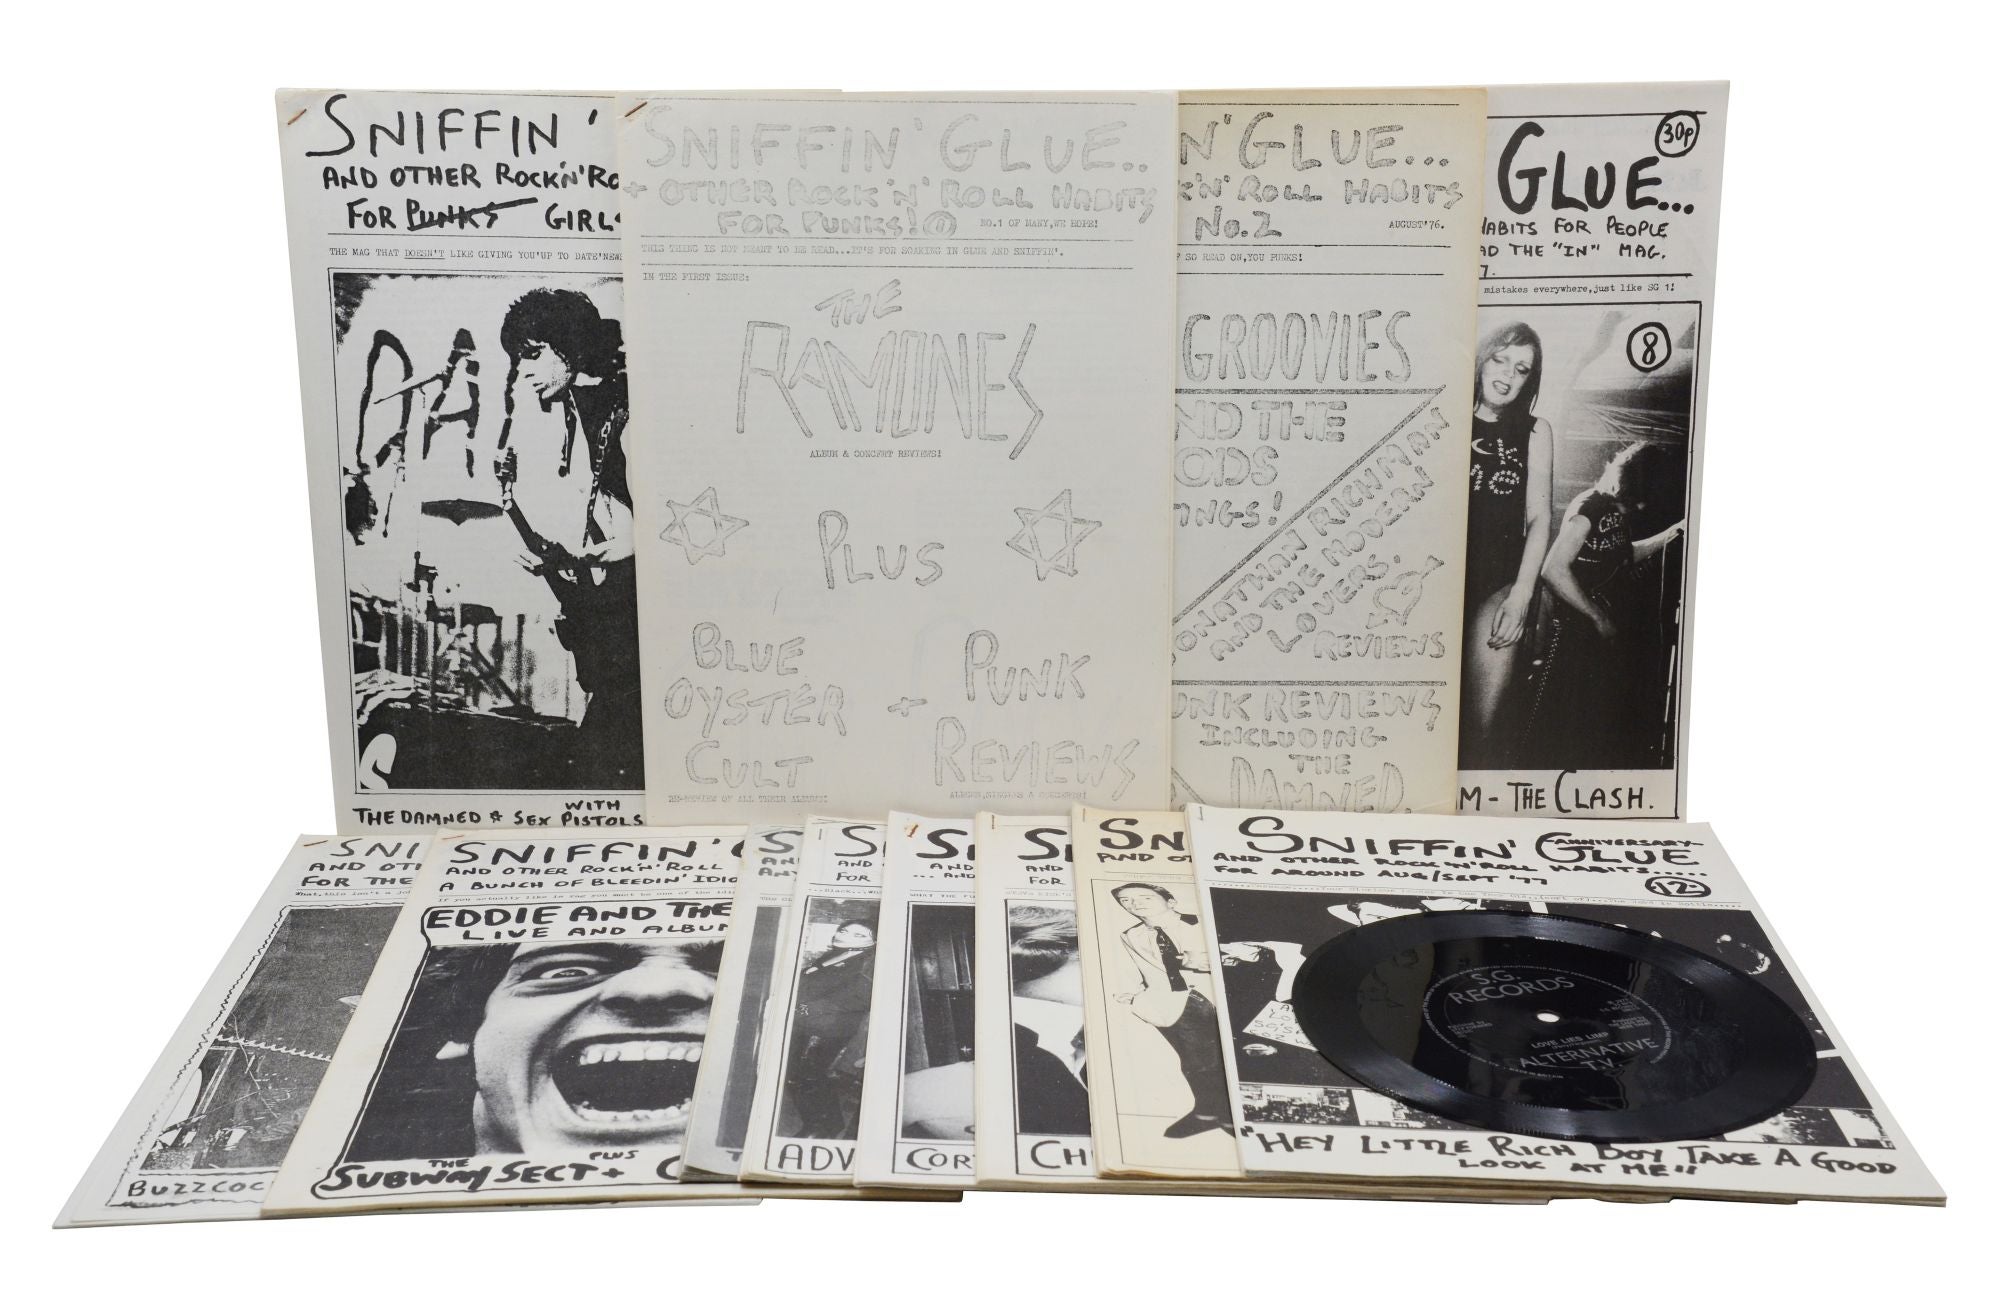 SNIFFIN' GLUE and Other Rock 'n' Roll Habits Volumes 1 through 12  including supplements, Mark Perry